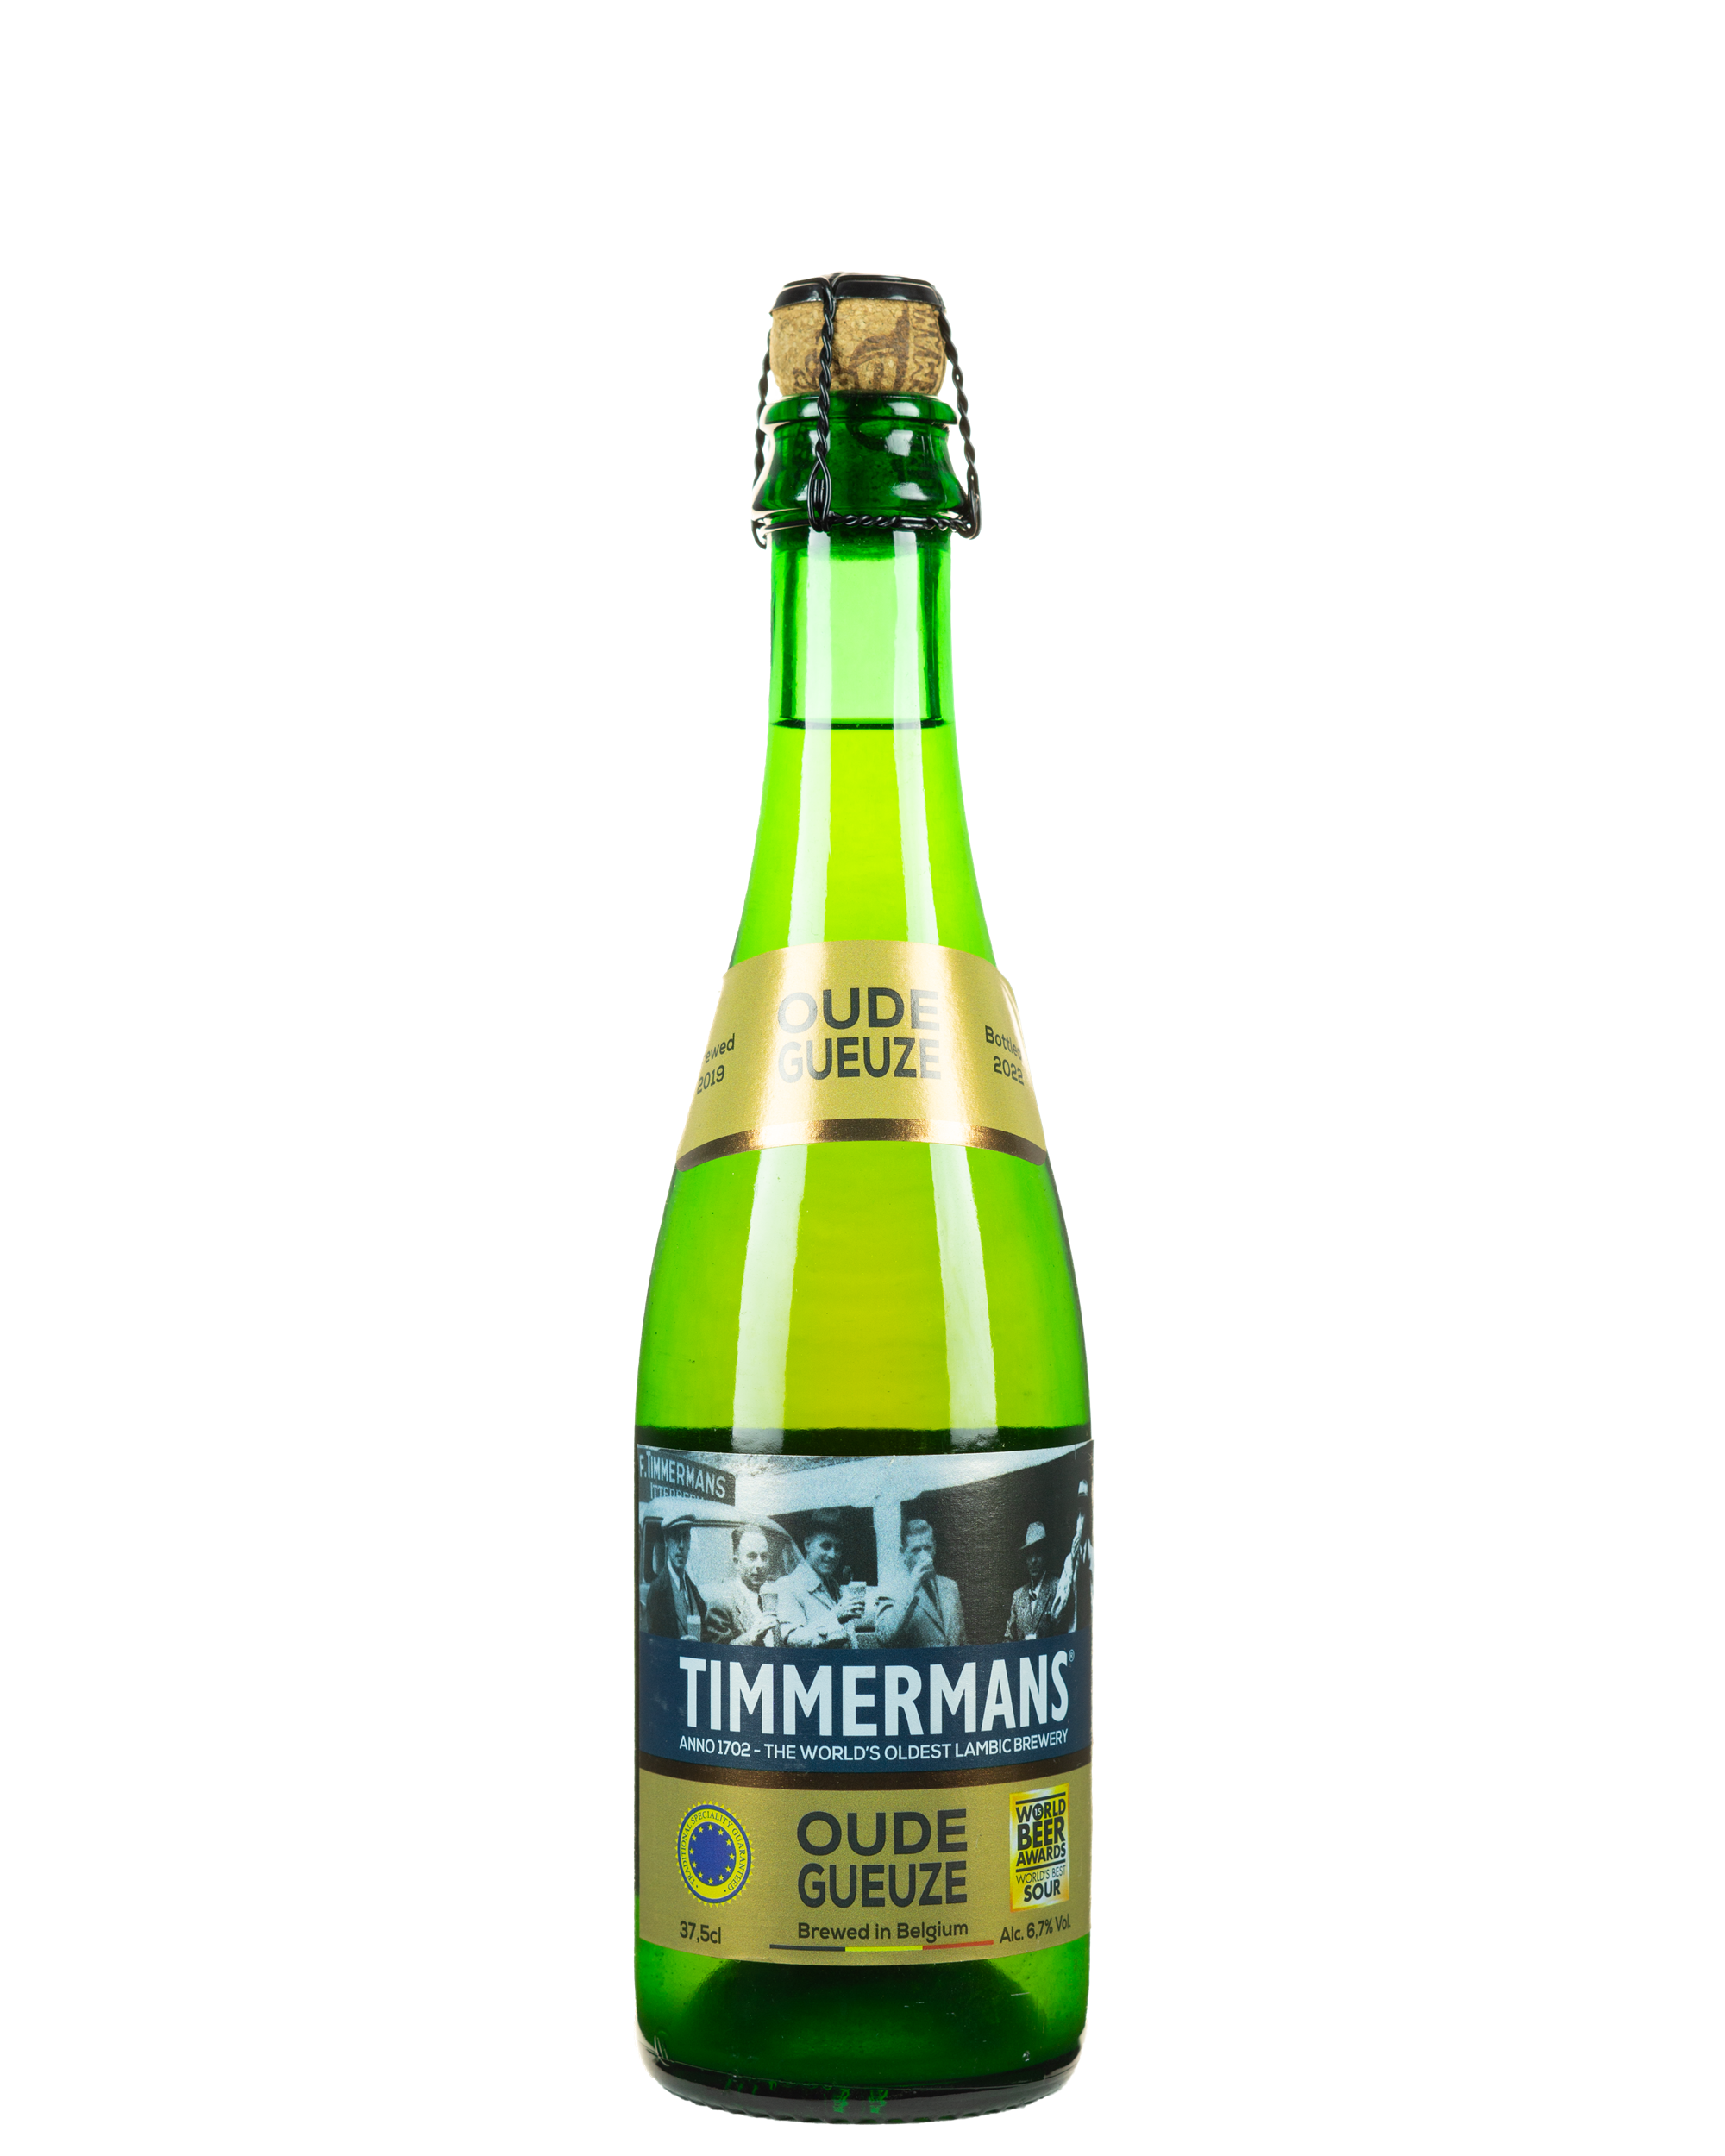 Timmermans Oude Gueuze 37,5Cl